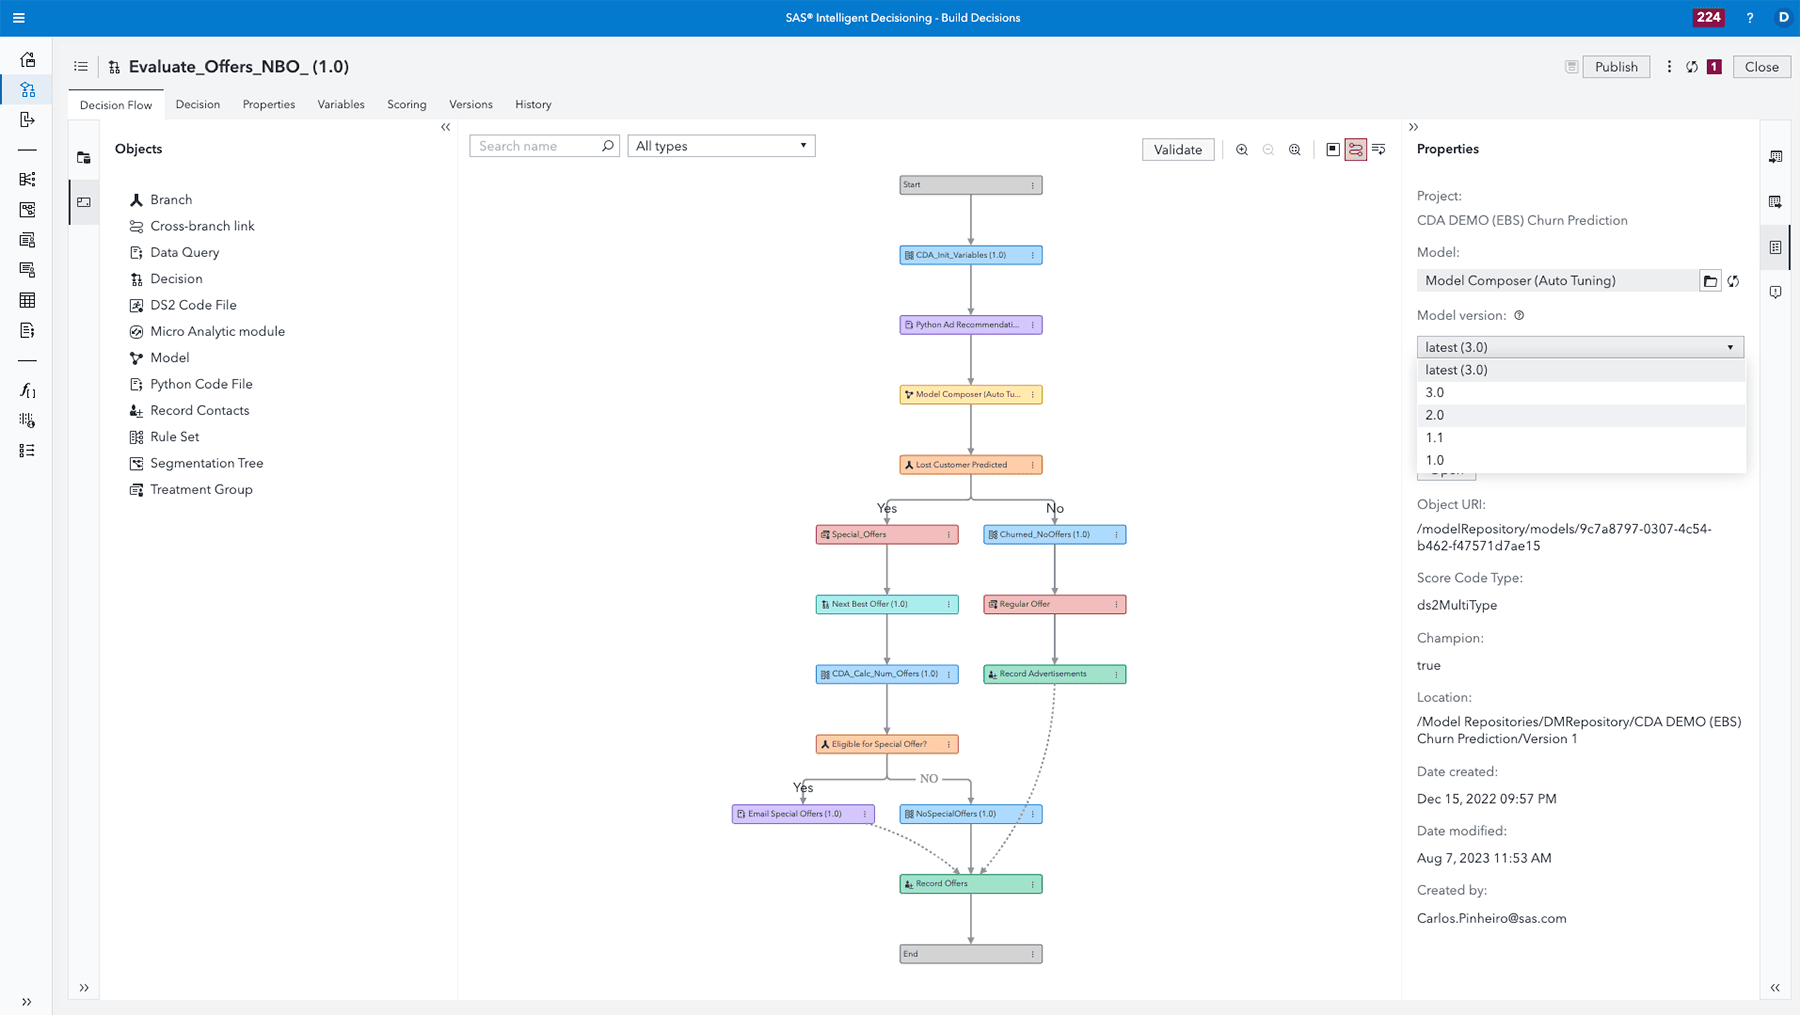 Screenshot of SAS Intelligent Decisioning - Decision flow object selection options